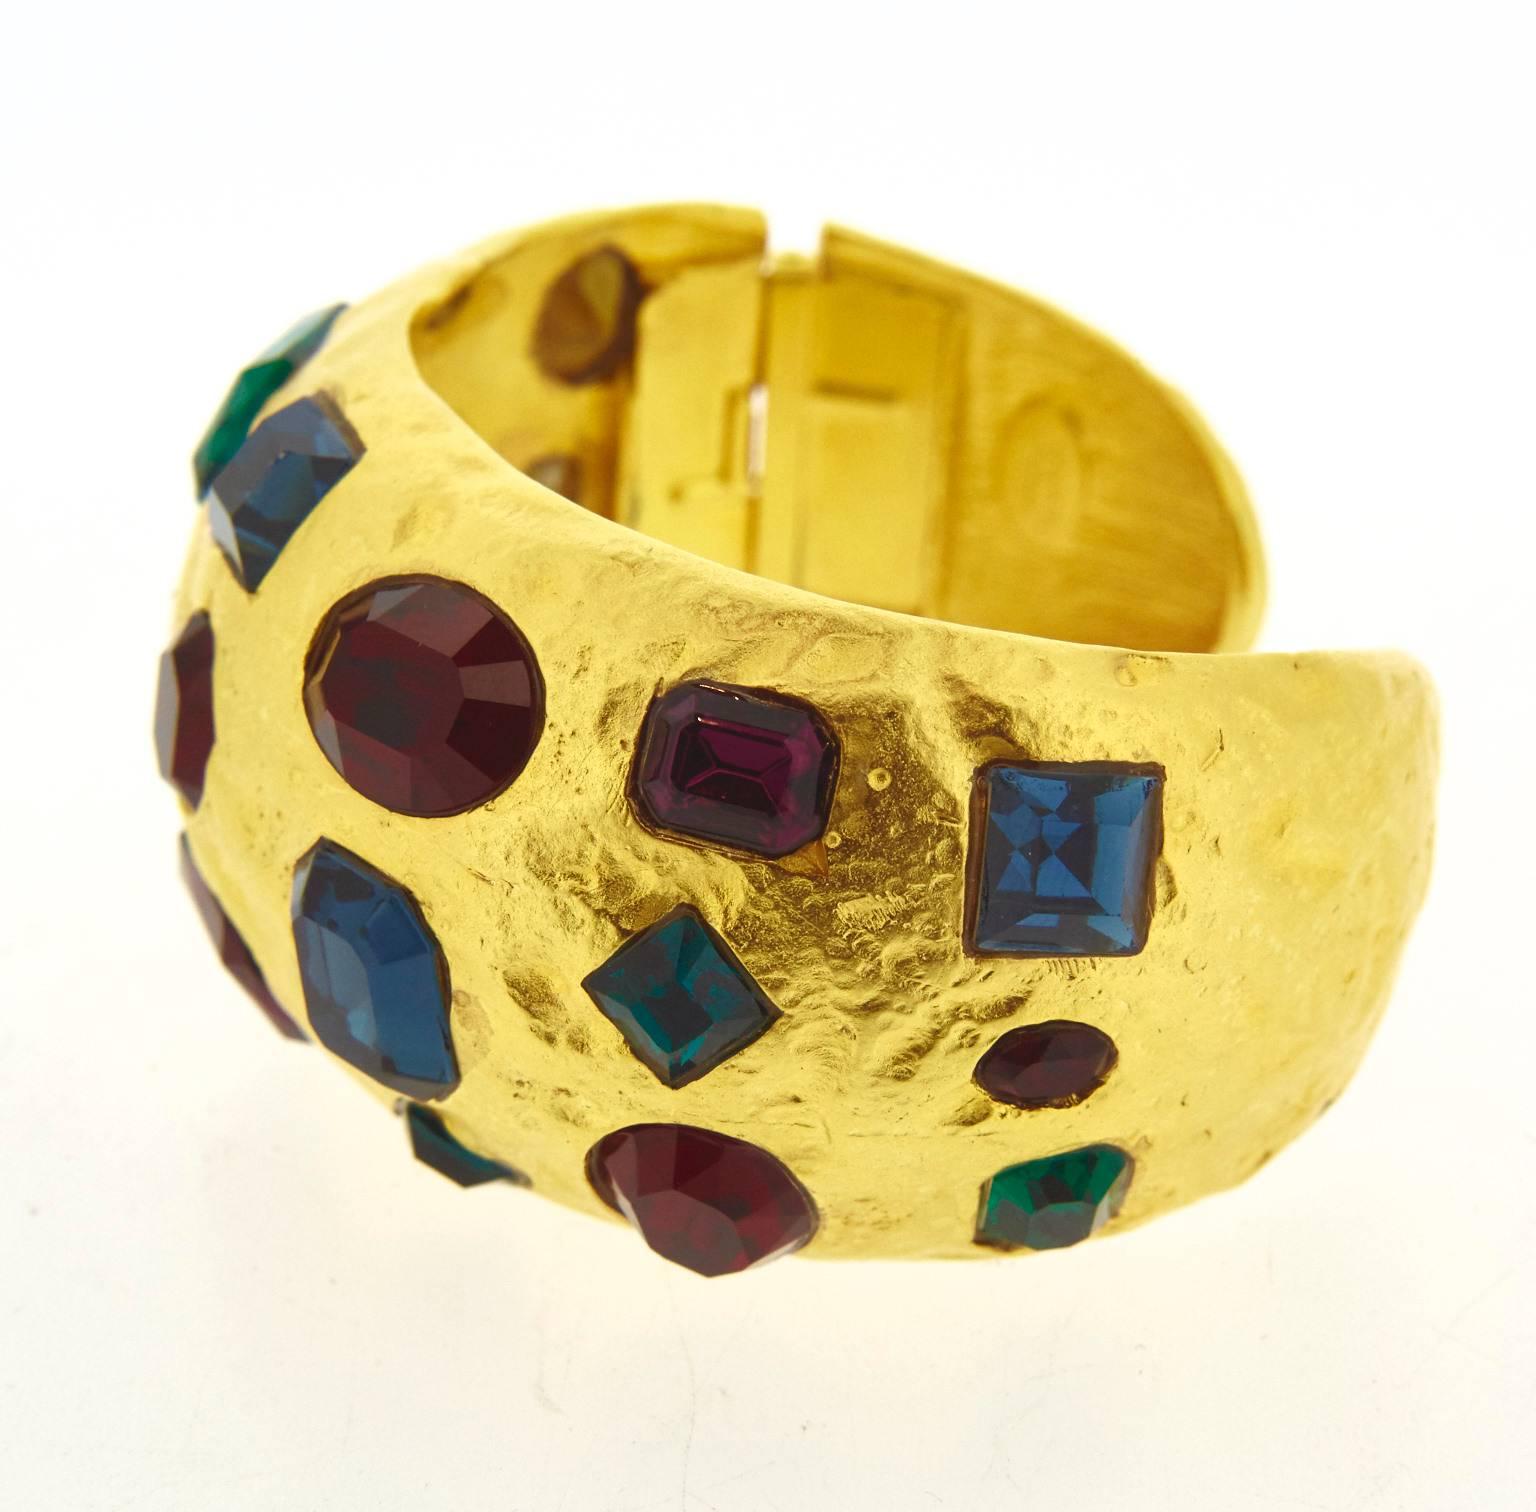 A gold plated clamper bracelet by Kenneth Jay Lane New York. Set with multi crystals in purple, emerald green, sapphire blue and red. One end has a clamper hinge opening up to put the bracelet on.

It measures 3.4cm high by 5.6cm wide, 17.5cm 7